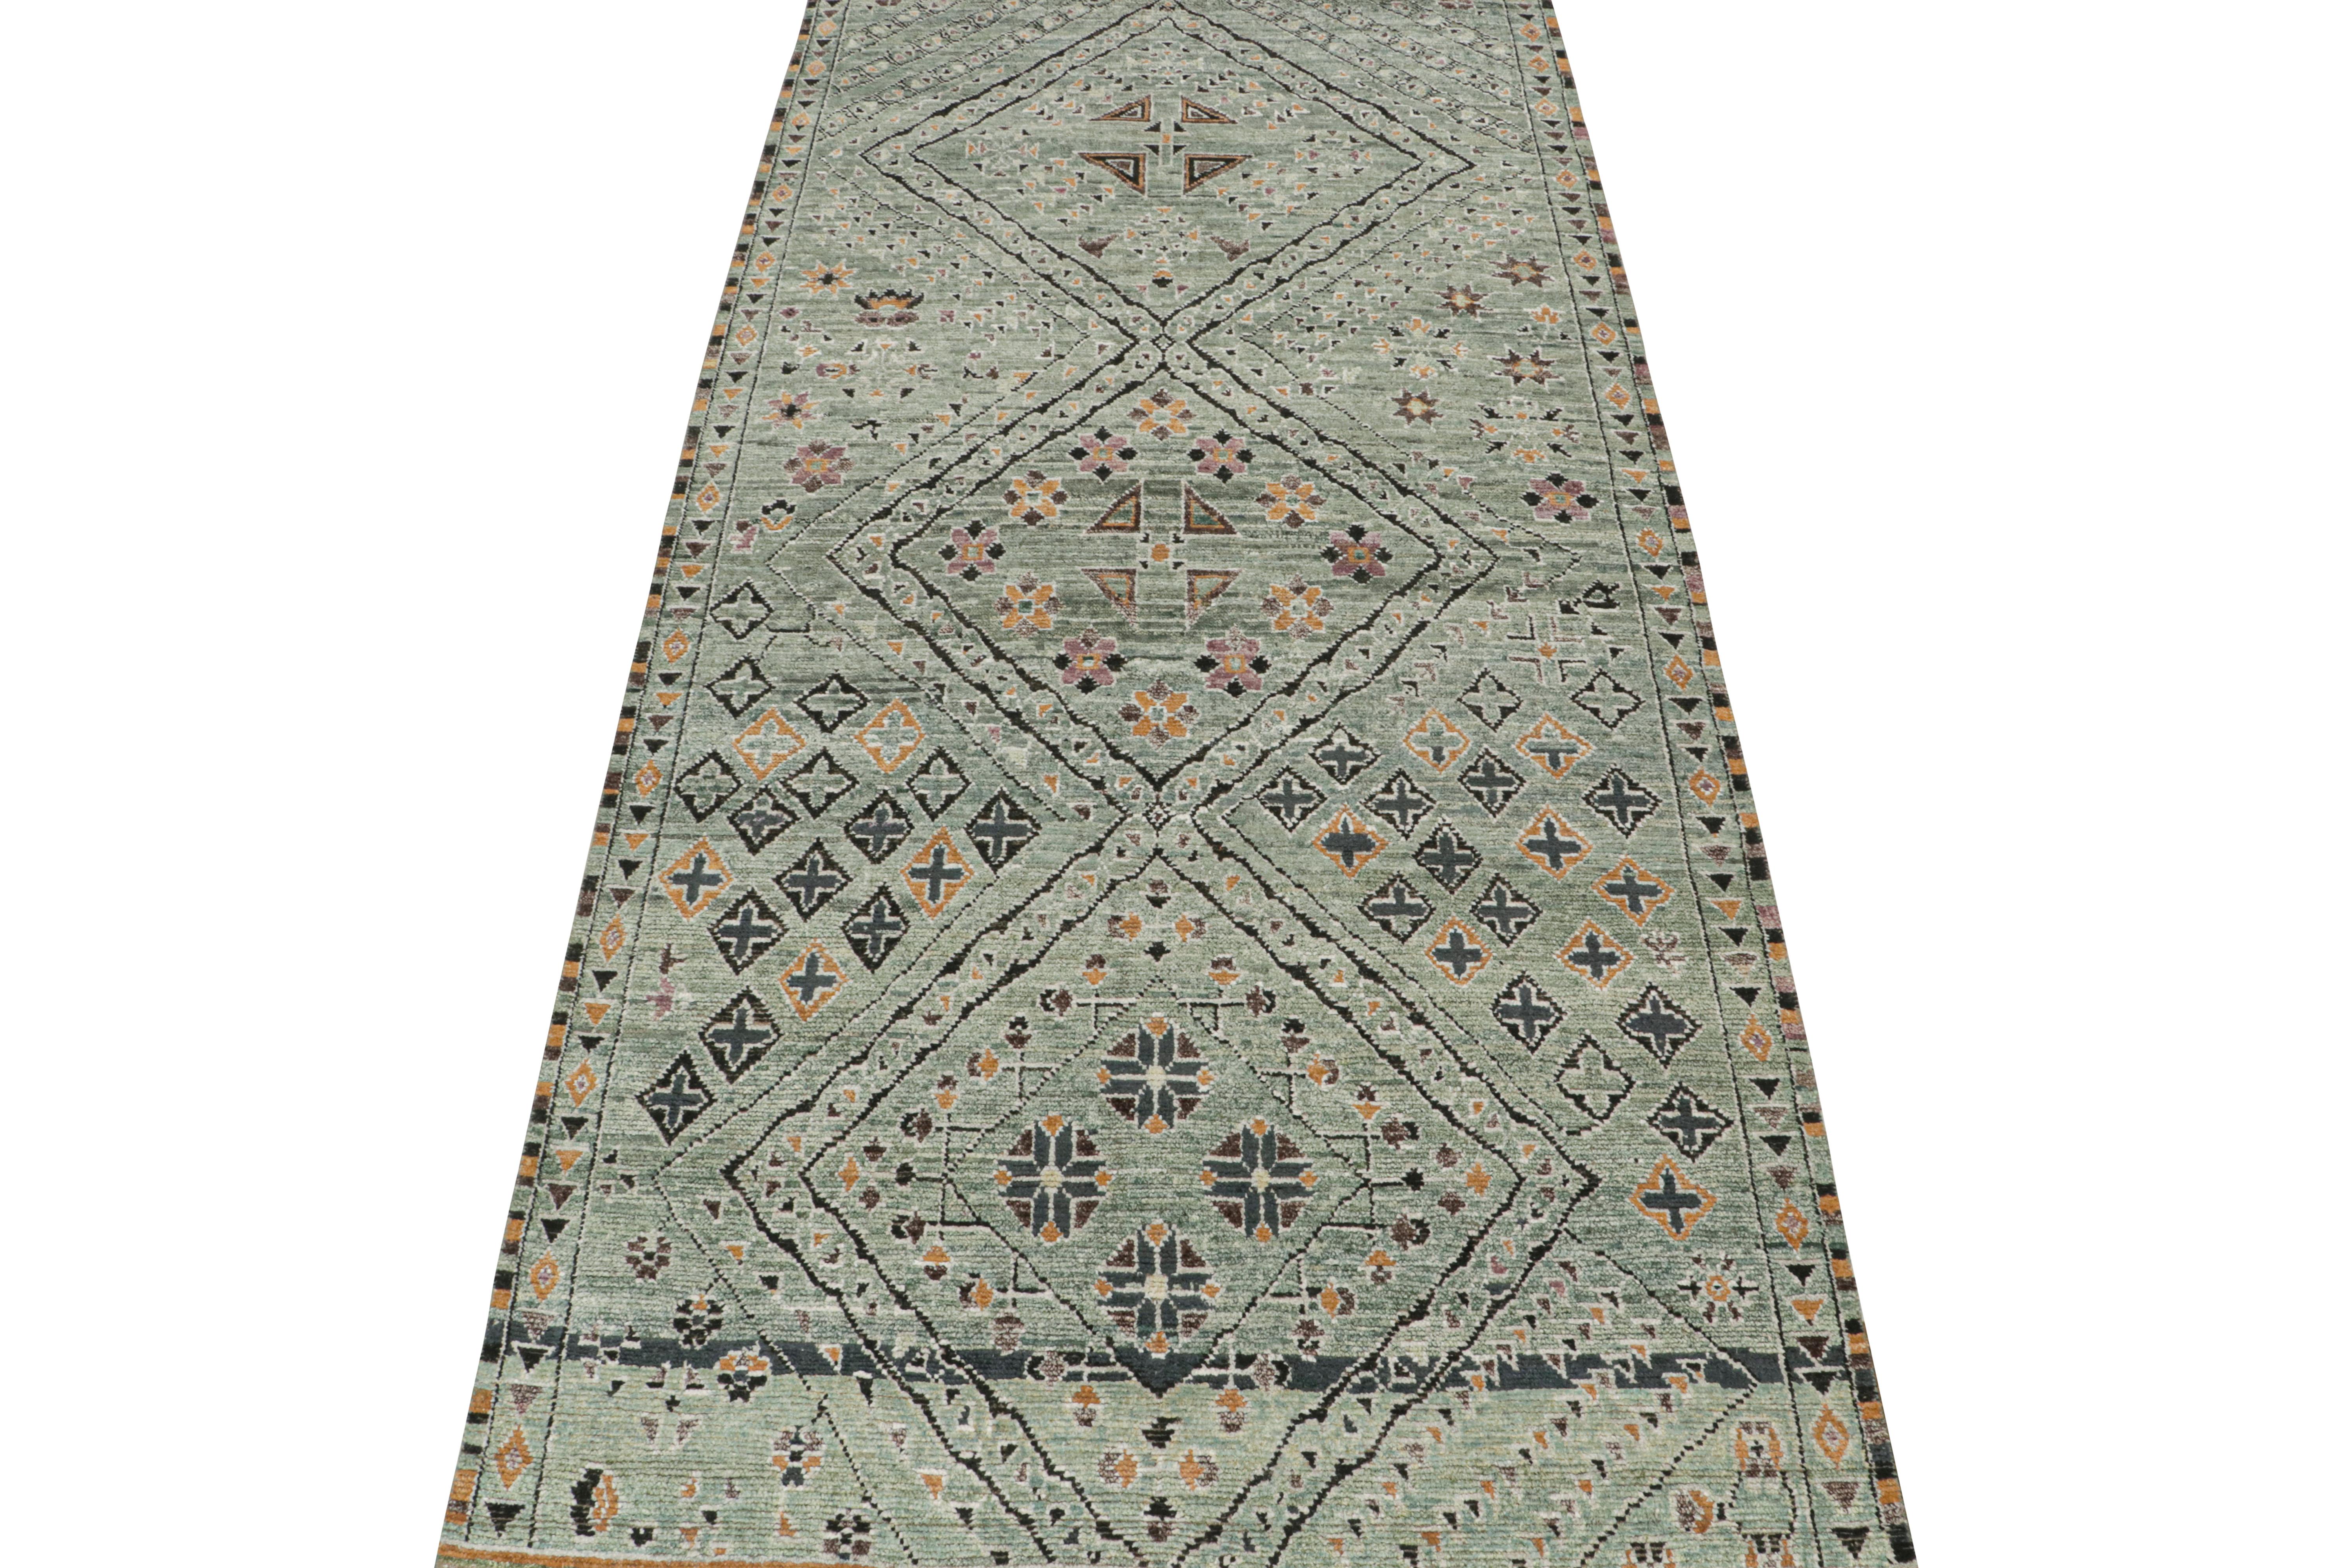 This 7x15 gallery runner is a new addition to Rug & Kilim’s Moroccan rug collection. Hand-knotted in wool and silk, its design recaptures the classic tribal sensibility in a new modern quality.

This particular design enjoys medallions and